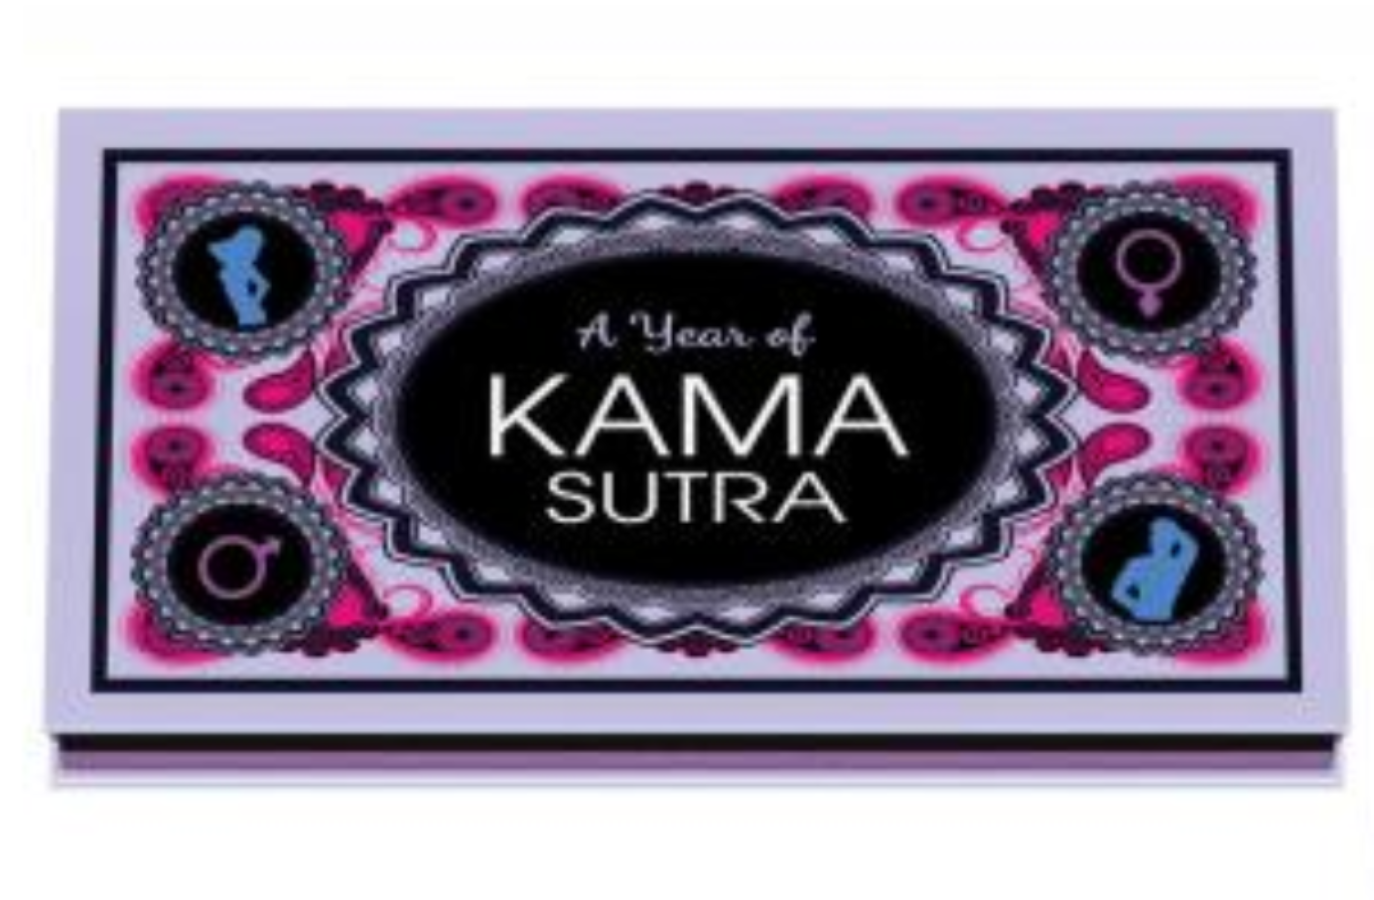 Kama Sutra - A year of